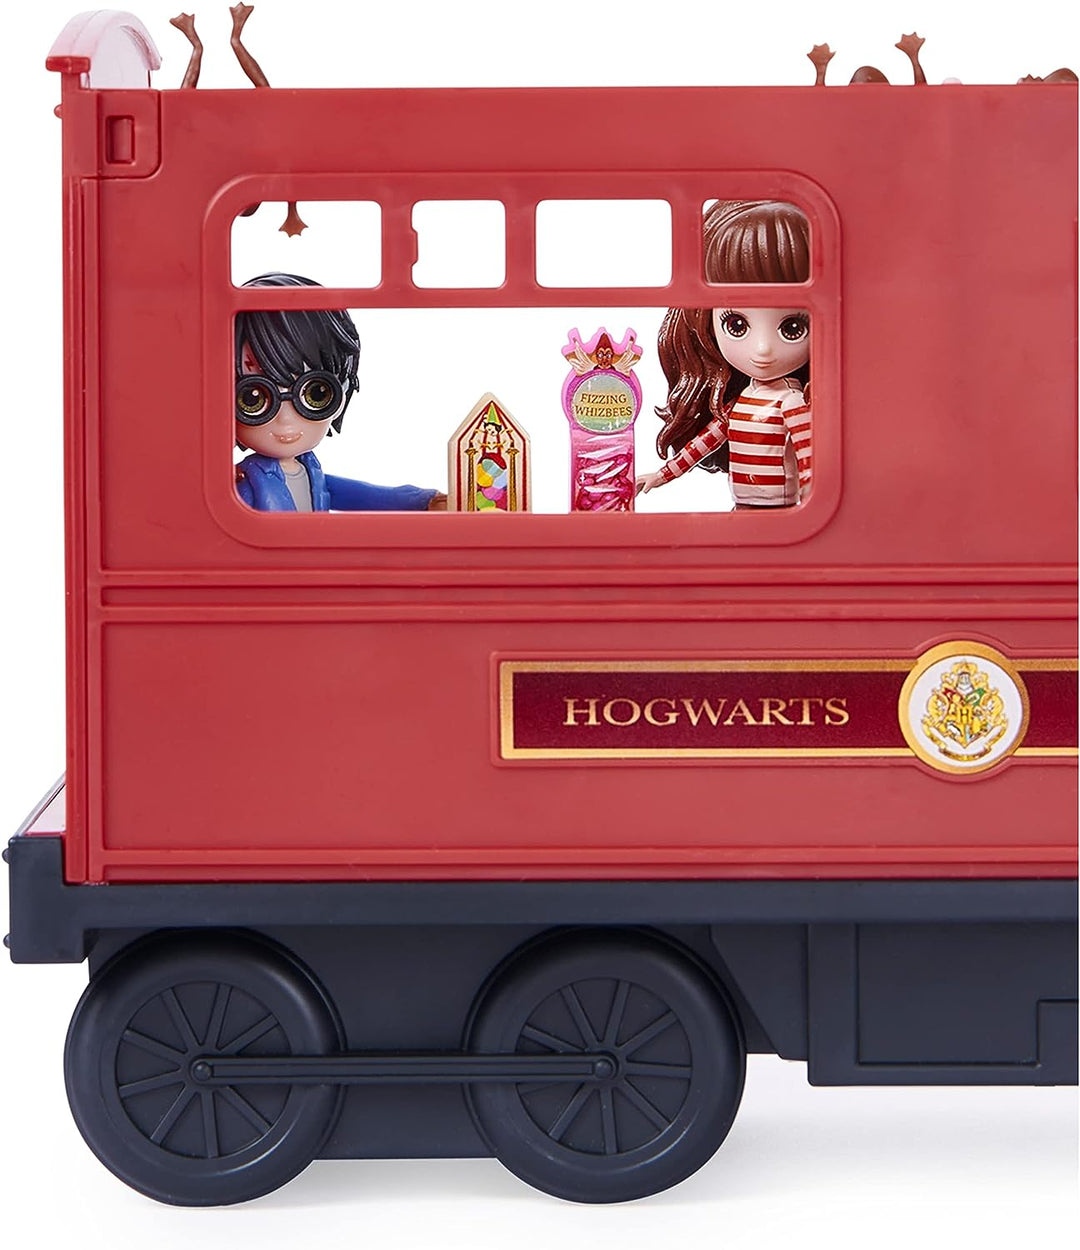 Wizarding World Harry Potter, Magical Minis Hogwarts Express Train Toy Playset with 2 Exclusive Figures